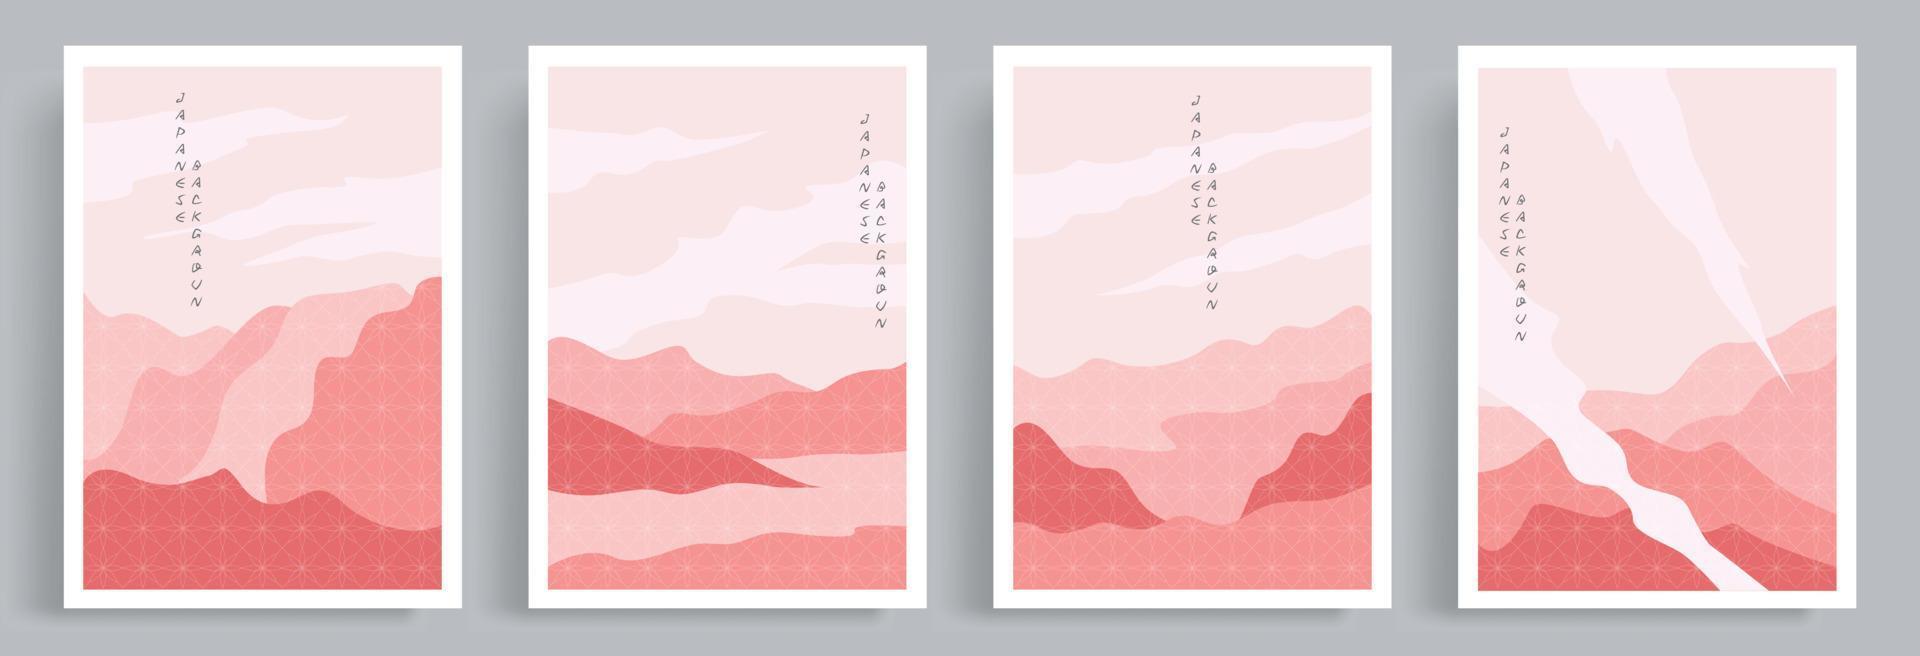 Abstract pink wall decor vector. Japanese oriental style arts with pattern. Suitable for prints, leaflet, canvas prints, poster, wall decoration, cover, social media and wallpaper. vector